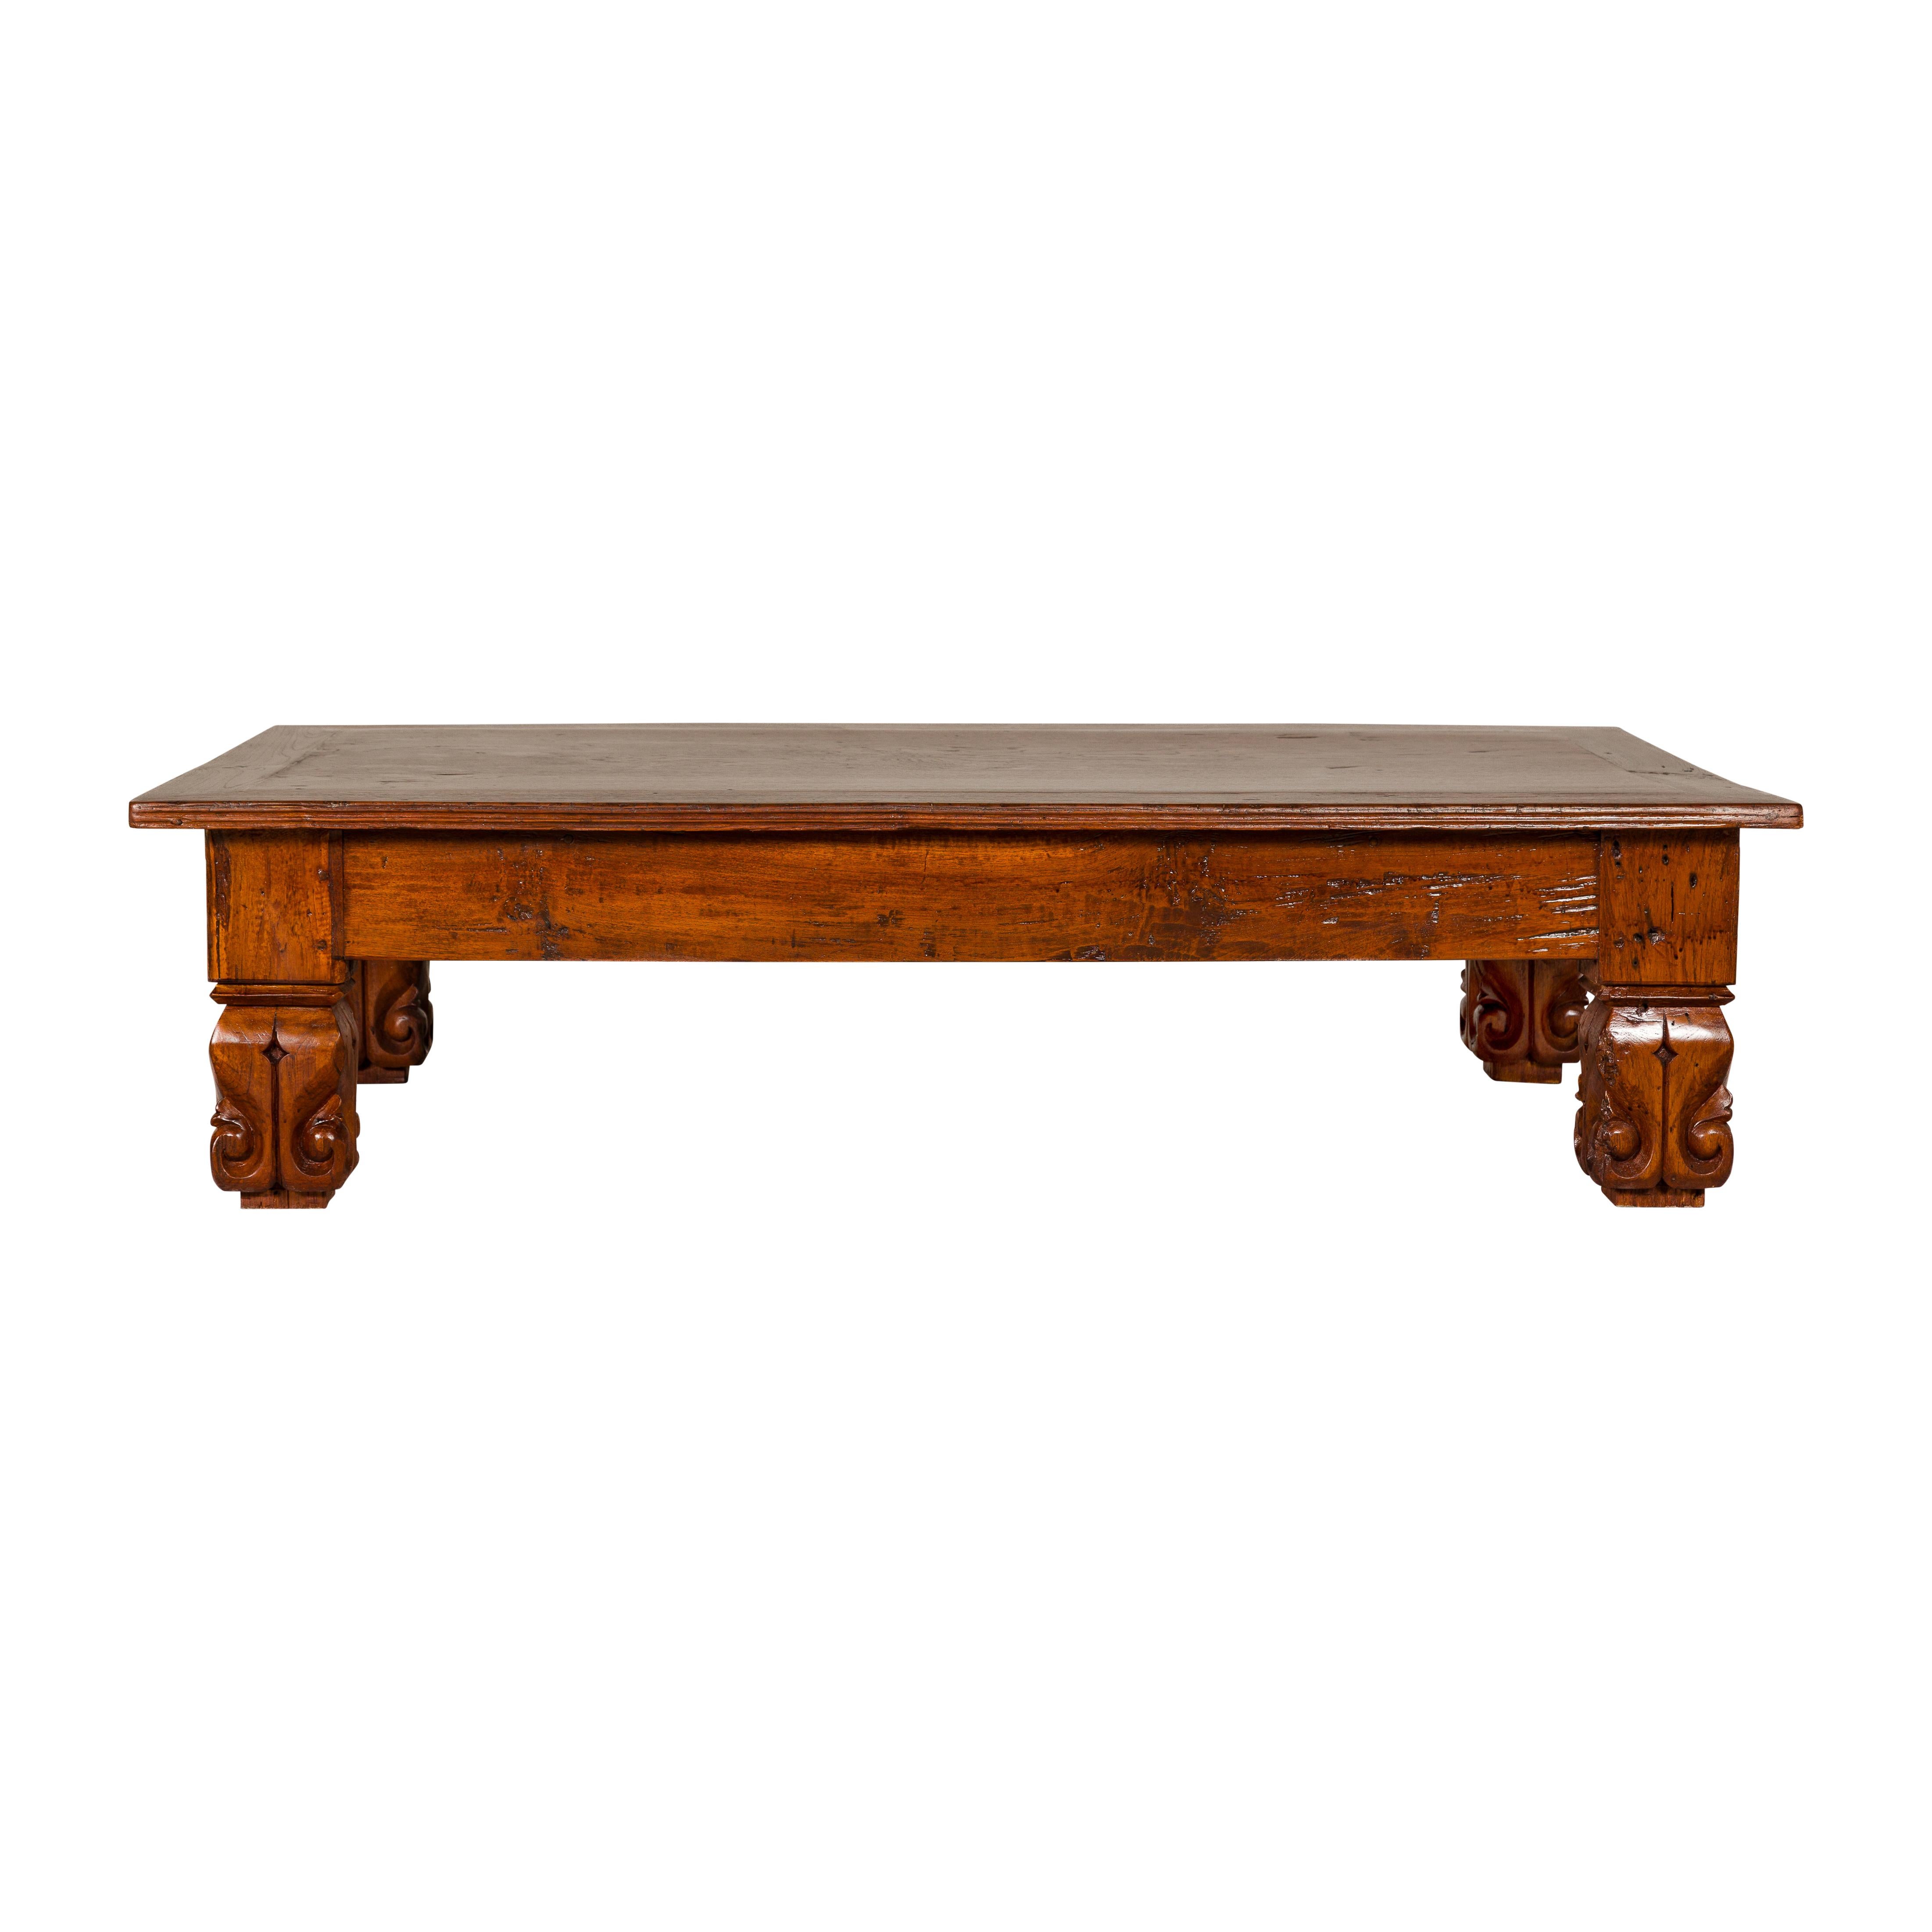 19th Century Teak Brown Wood Low Coffee Table with Scroll Carved Legs For Sale 12